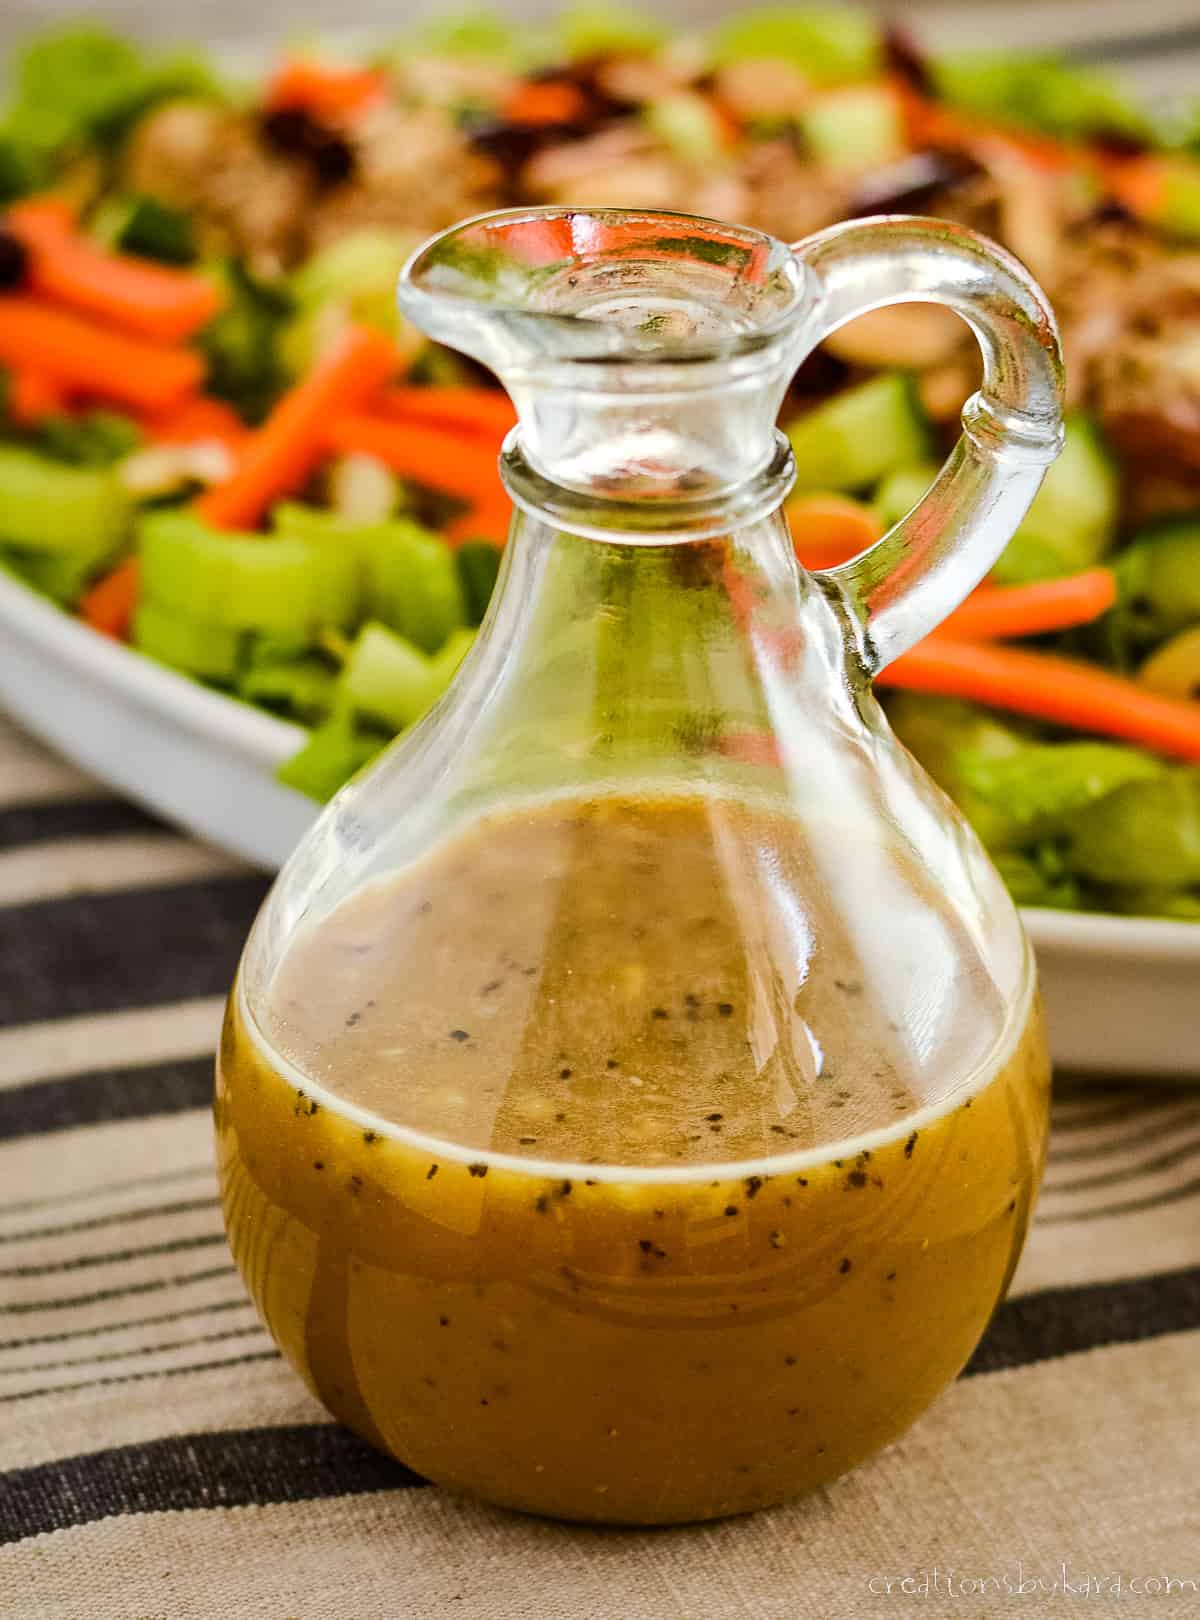 bottle of homemade honey mustard dressing in front of a plate of salad